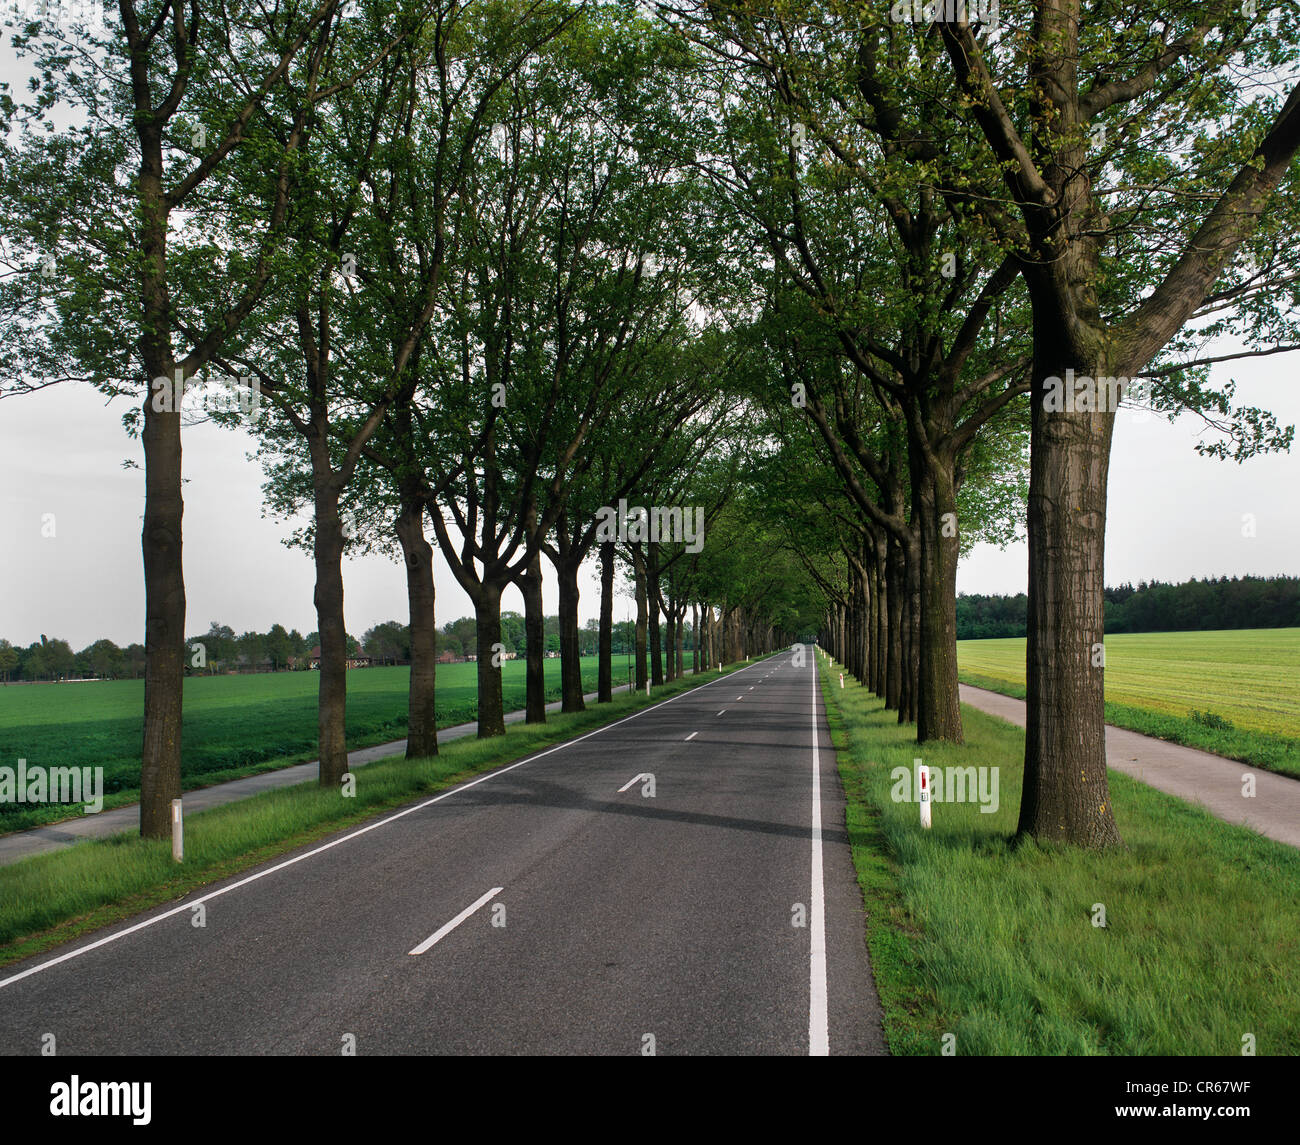 Oak tree avenue on a federal road with cycle path, Mecklenburg-Western Pomerania, Germany, Europe Stock Photo